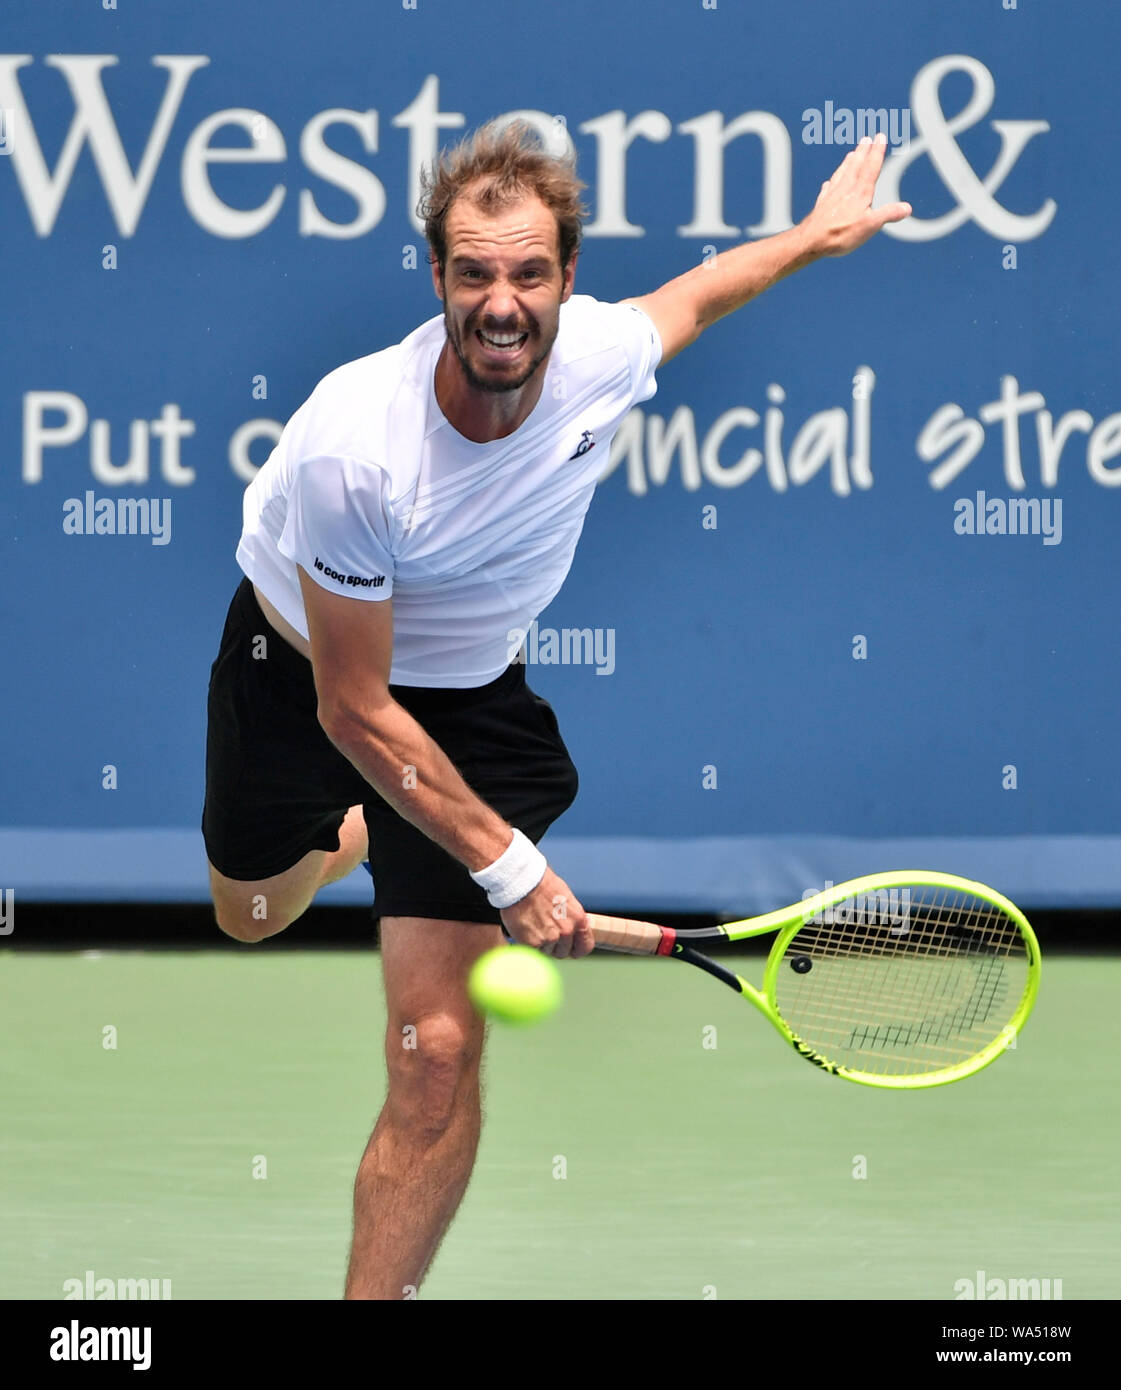 Mason, Ohio, USA. 17th Aug 2019, Richard Gasquet (FRA) loses to David Goffin (ESP) 6-3, 6-4, at the Western & Southern Open being played at Lindner Family Tennis Center in Mason, Ohio. © Leslie Billman/Tennisclix/CSM Credit: Cal Sport Media/Alamy Live News Stock Photo